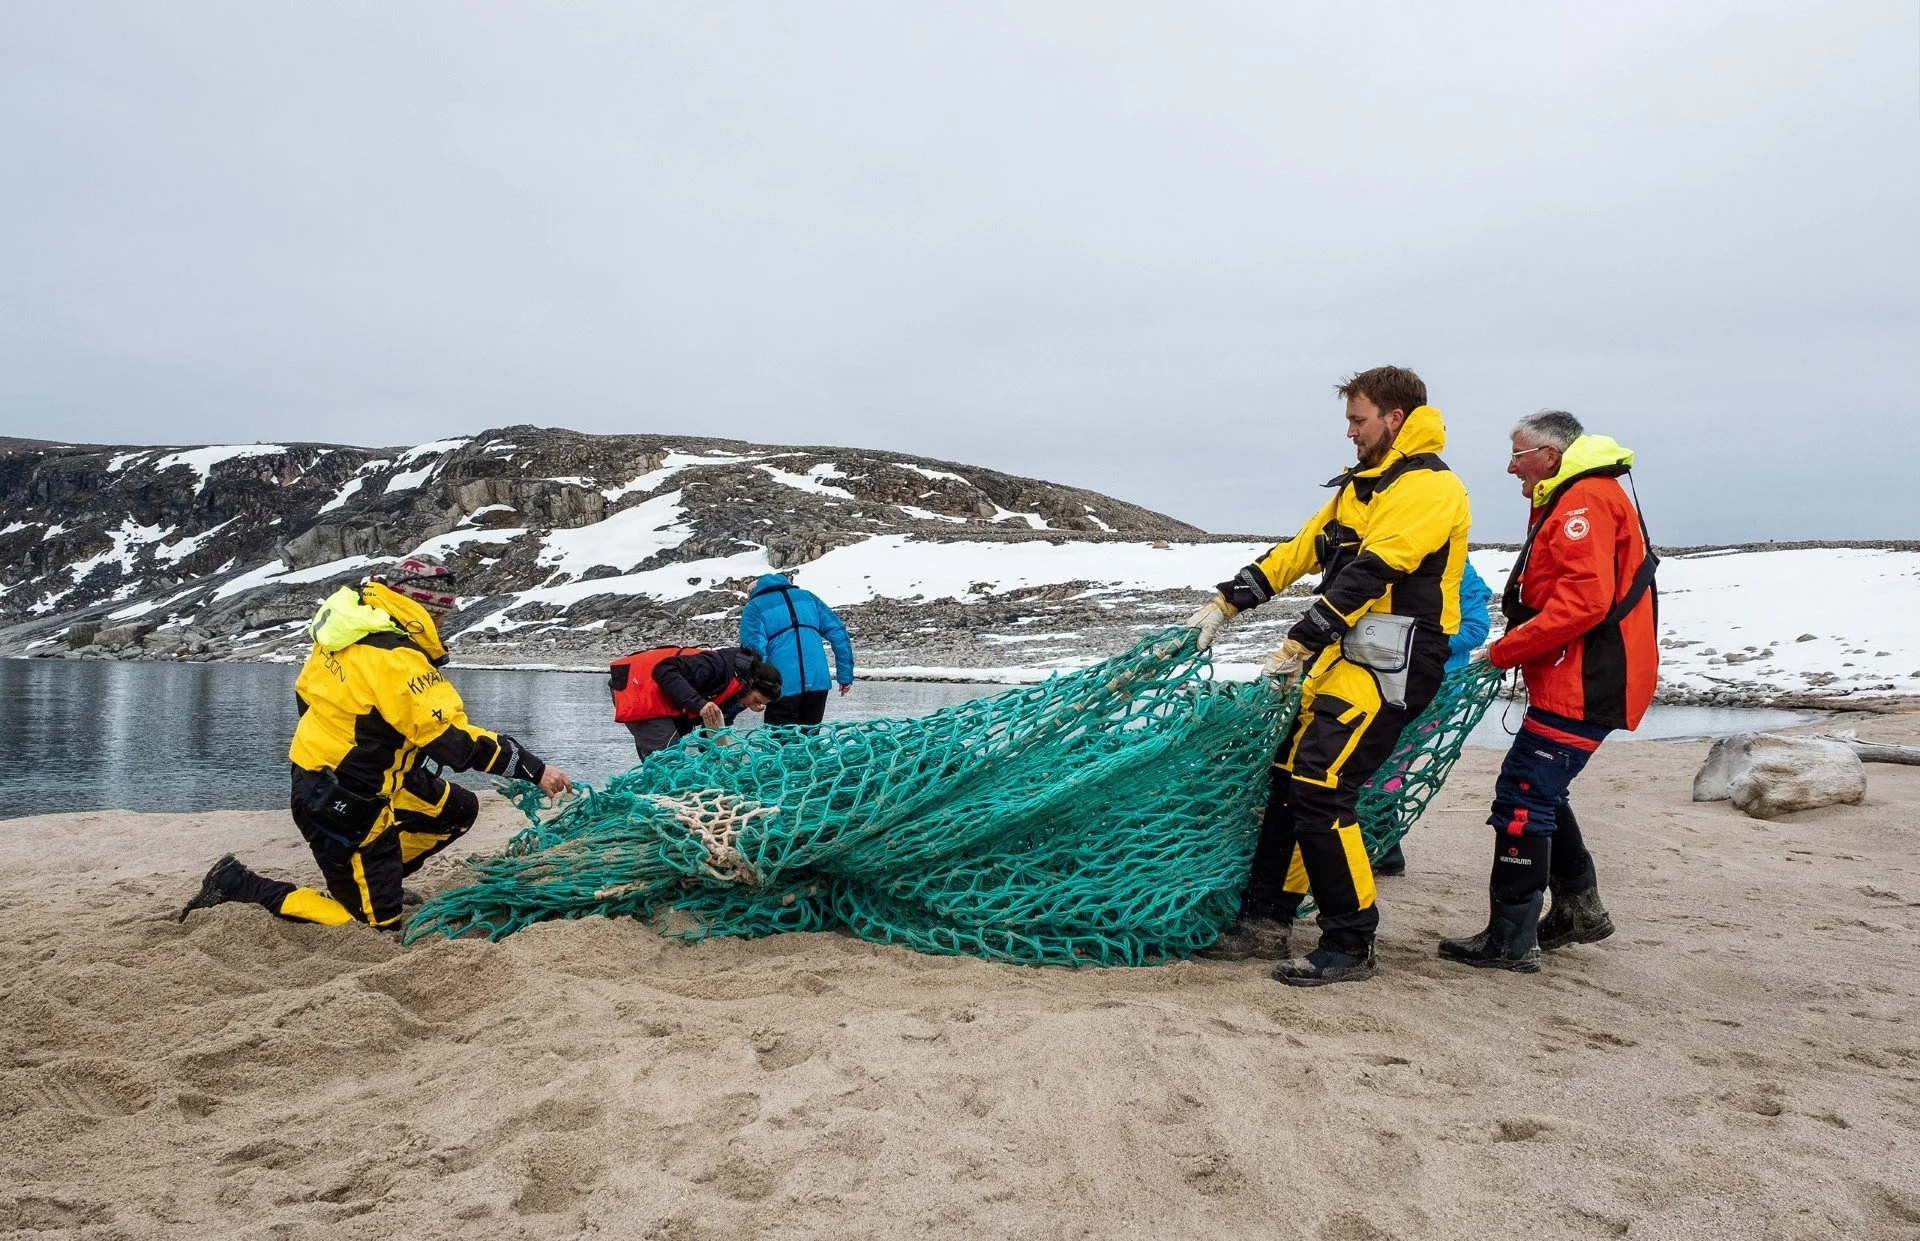 extra_beach_cleaning_at_kap_bruun_svalbard_hgr_123191_photo_stefan_dall_iconic_2560x1655